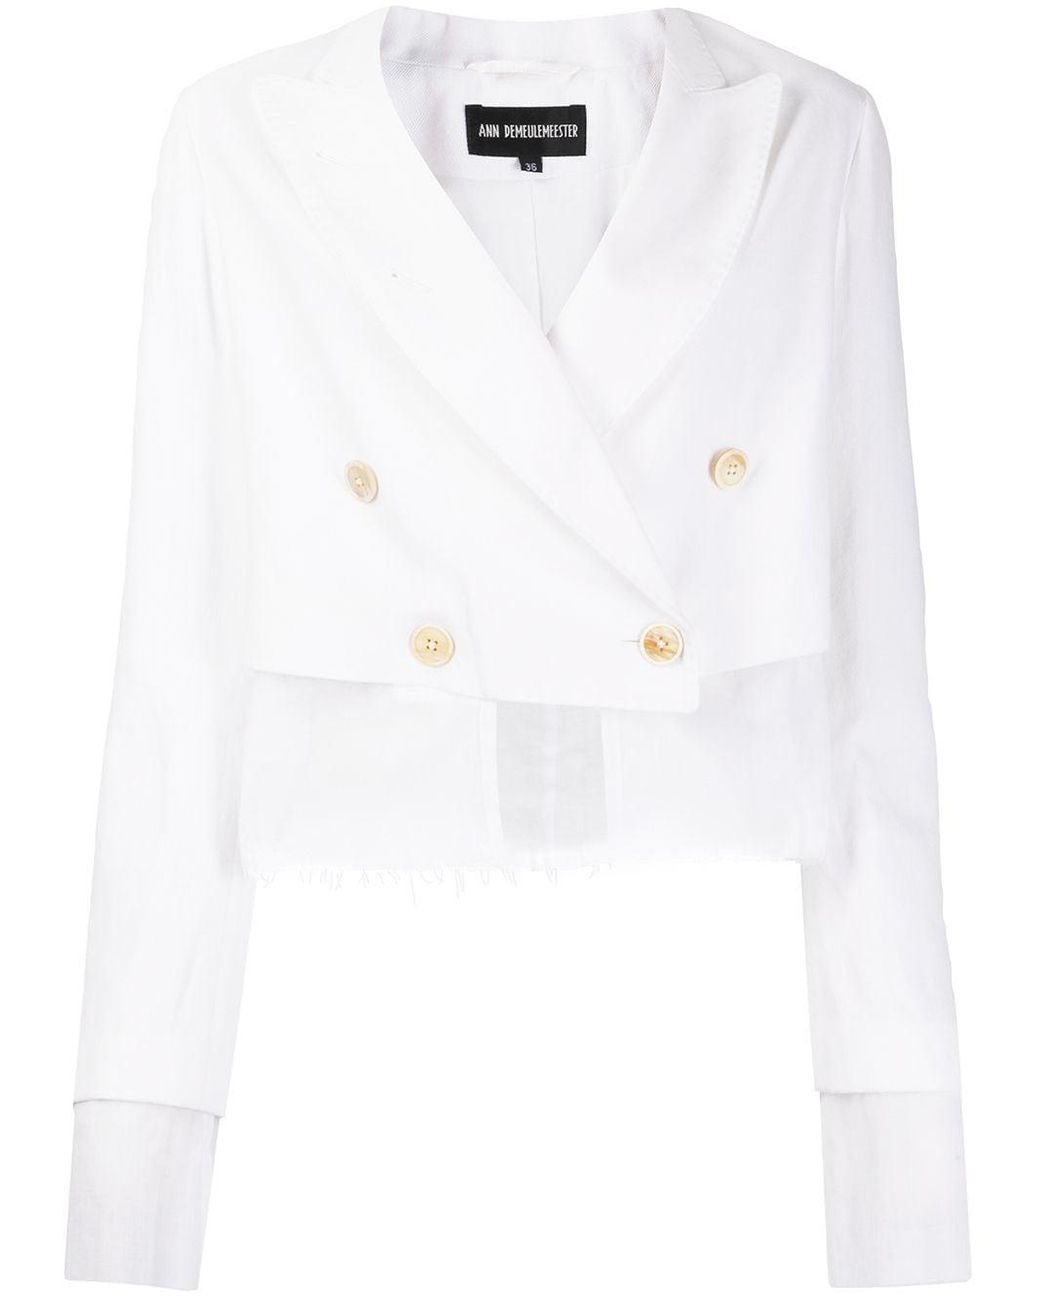 Ann Demeulemeester Cotton Layered Cropped Jacket in White - Lyst